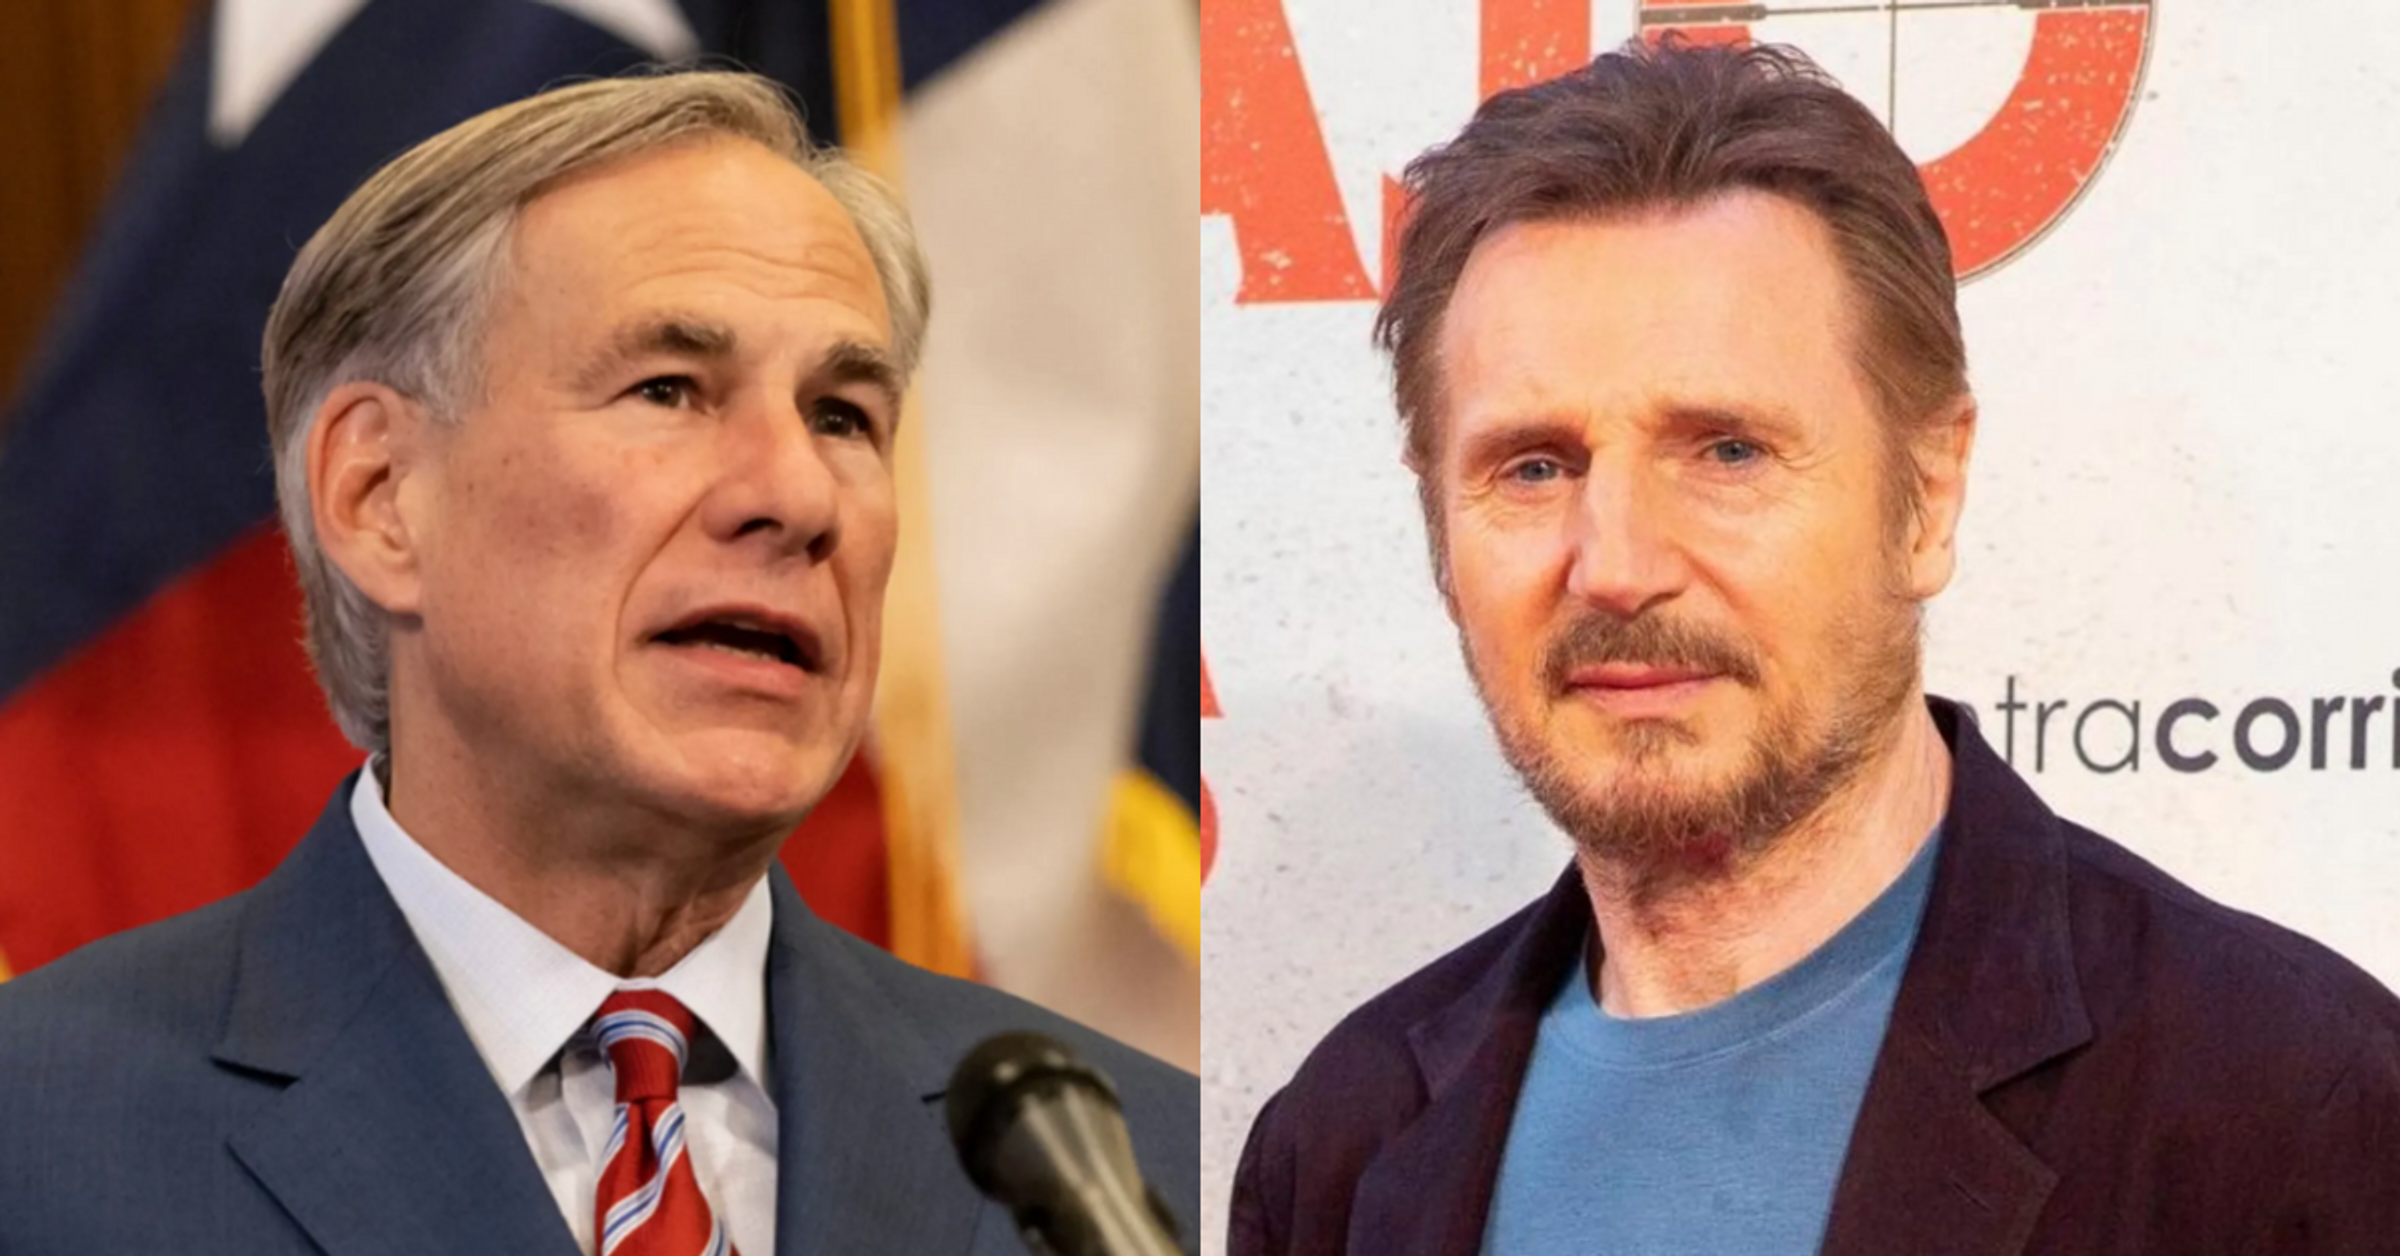 Greg Abbott Dragged After Getting Into Feud With Parody Liam Neeson Account Over Border Wall (comicsands.com)